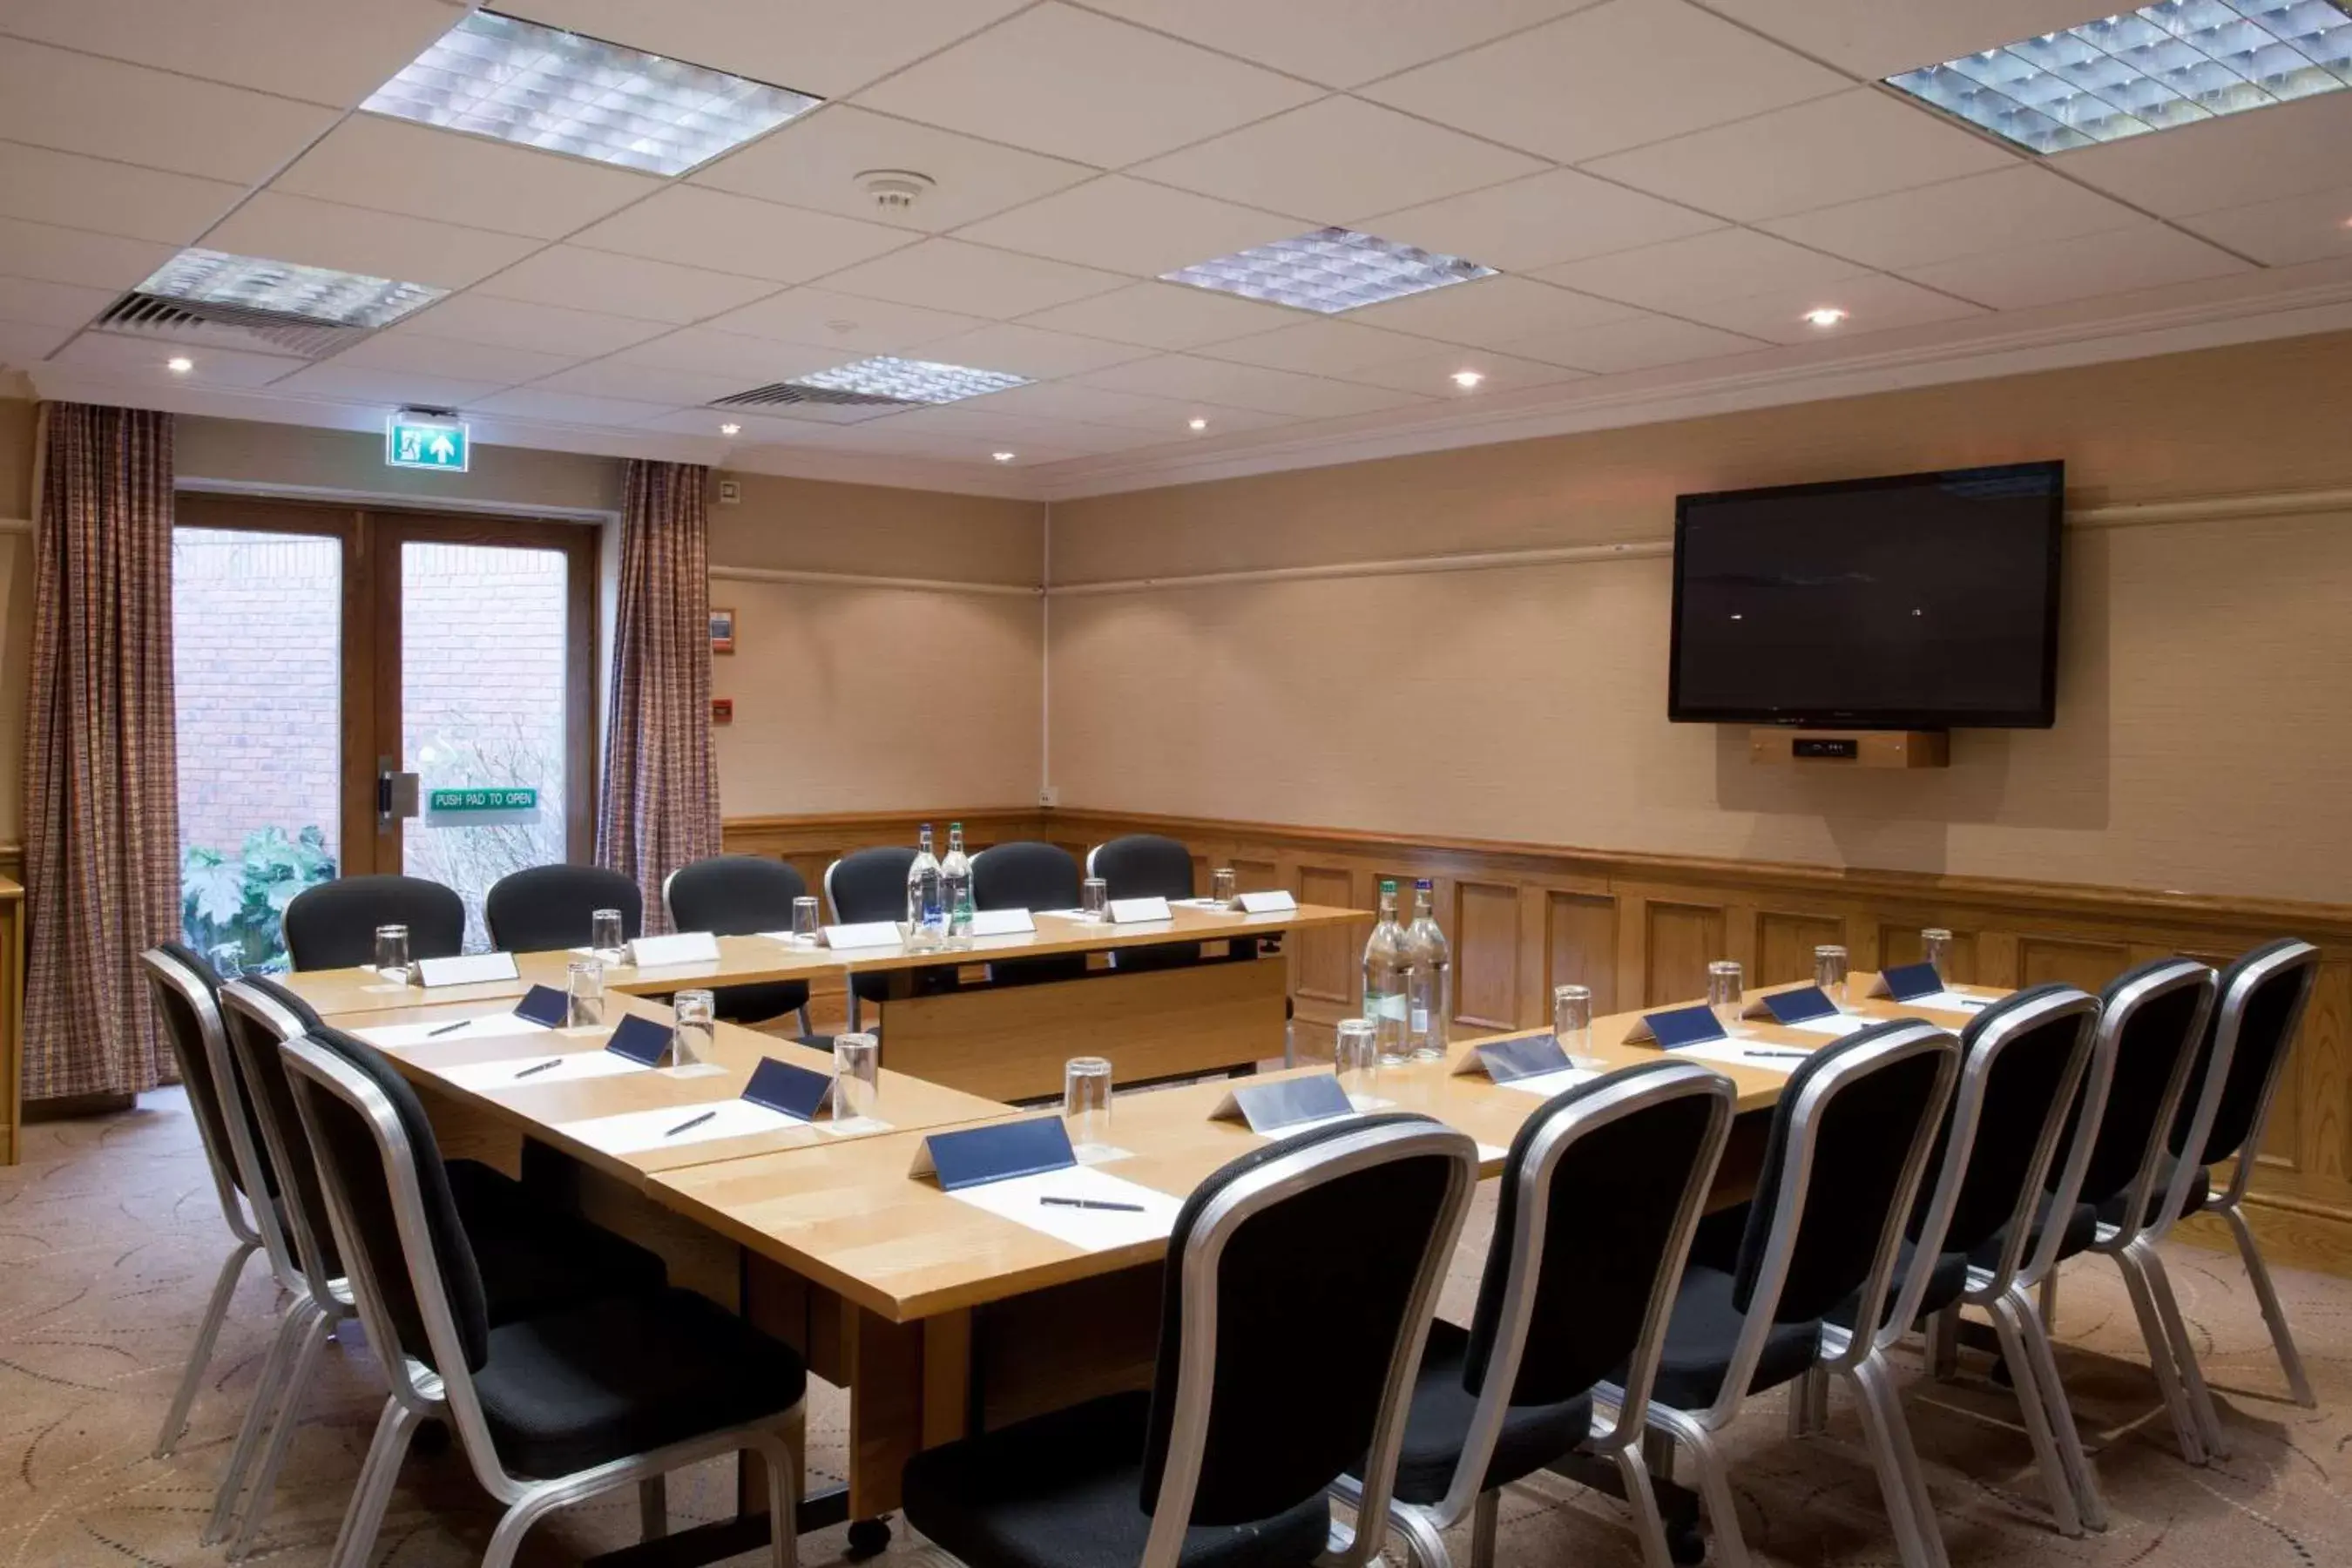 Meeting/conference room in Hilton East Midlands Airport